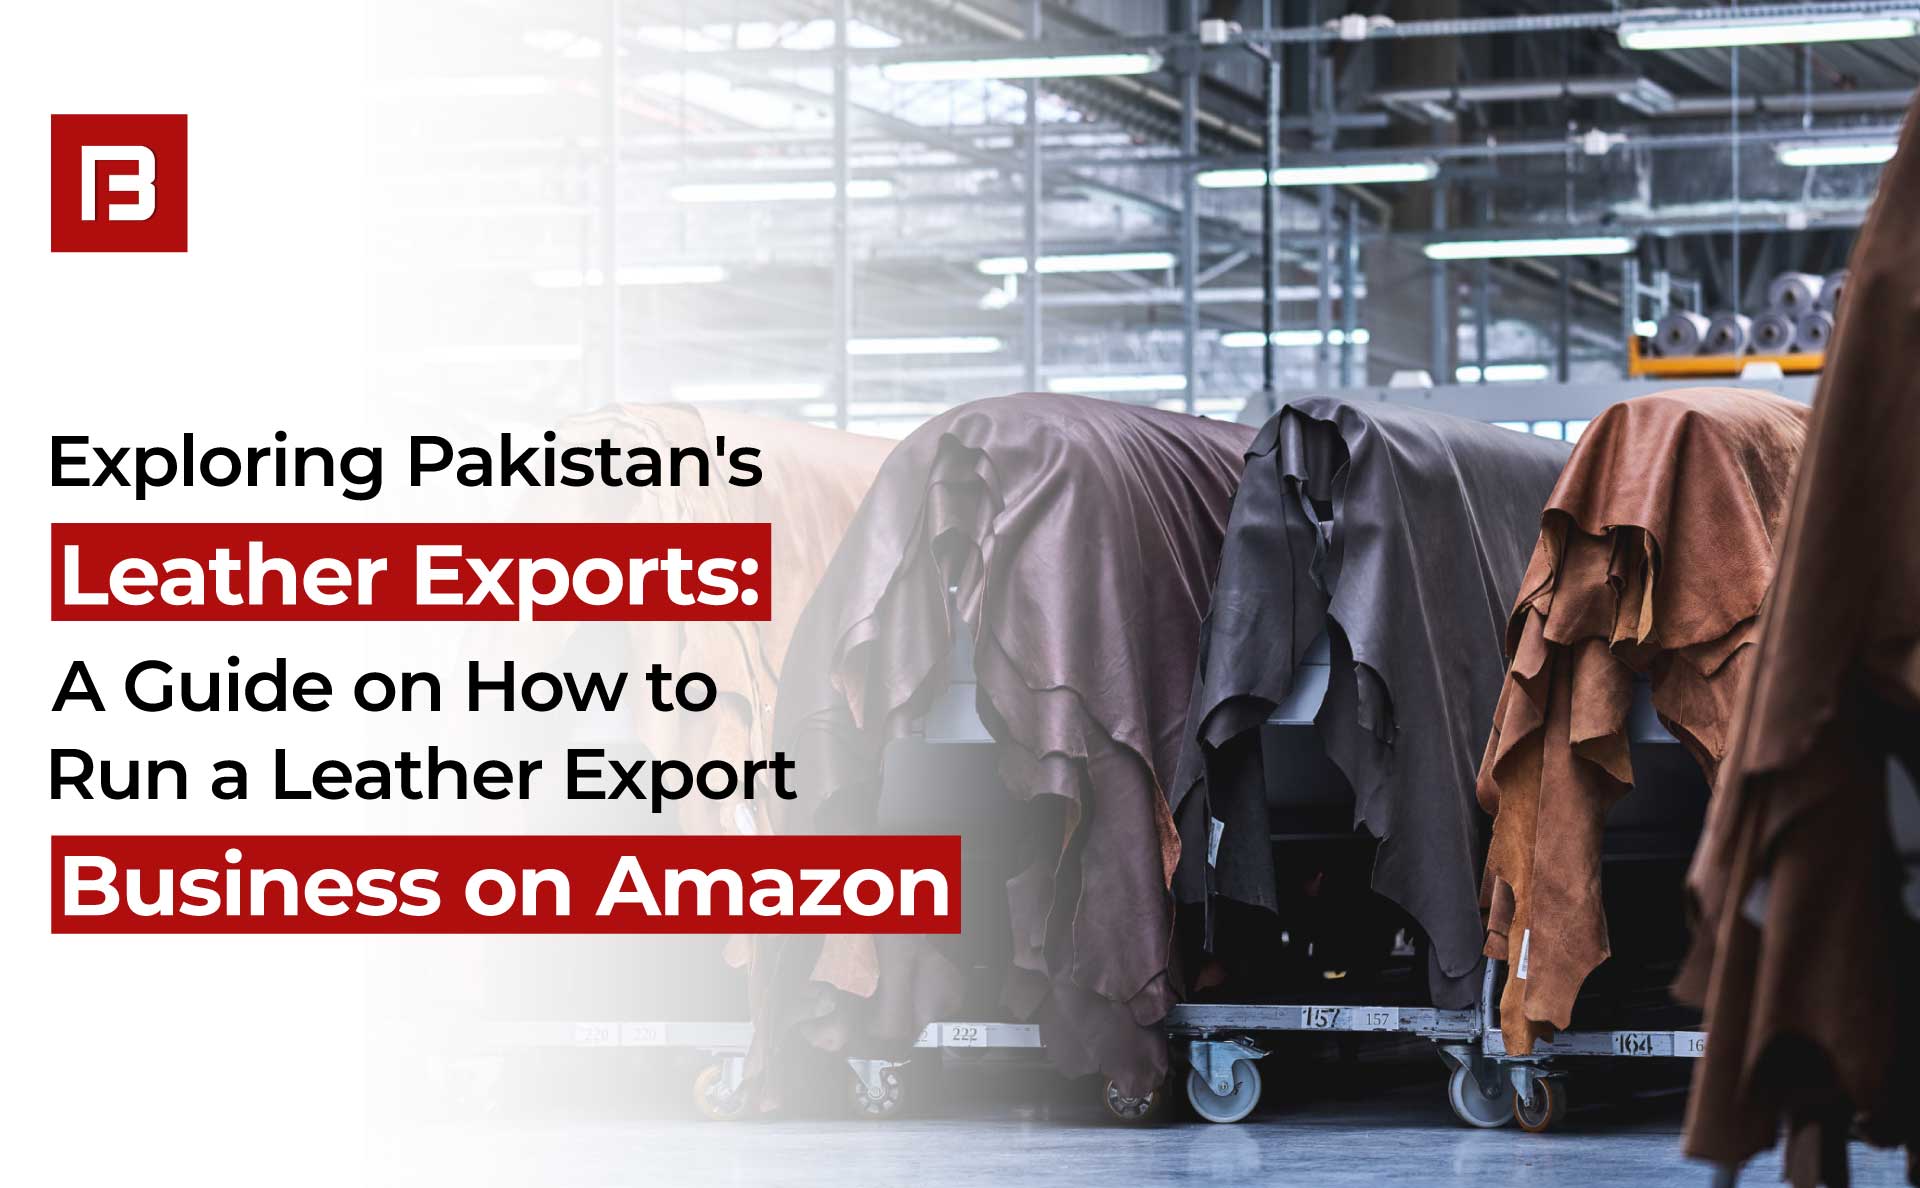 Exploring Pakistan’s Leather Exports: A Guide on How to Run a Leather Export Business on Amazon